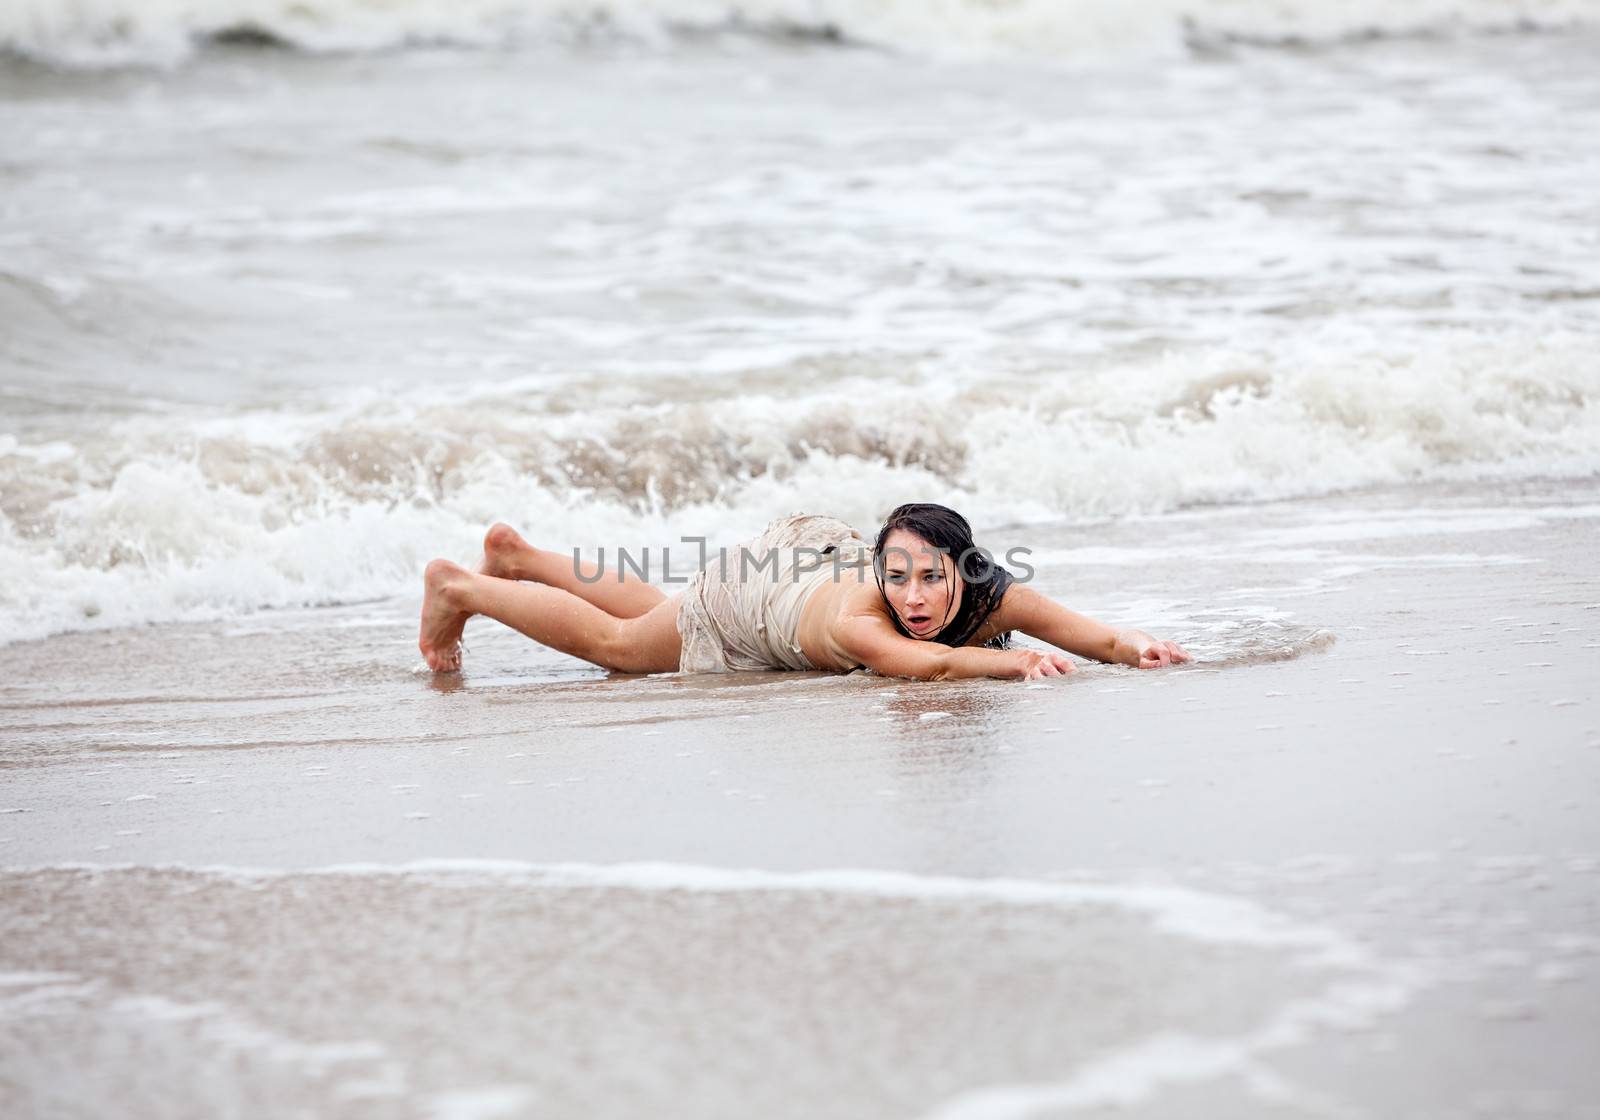 seminude woman in the cold sea waves by palinchak